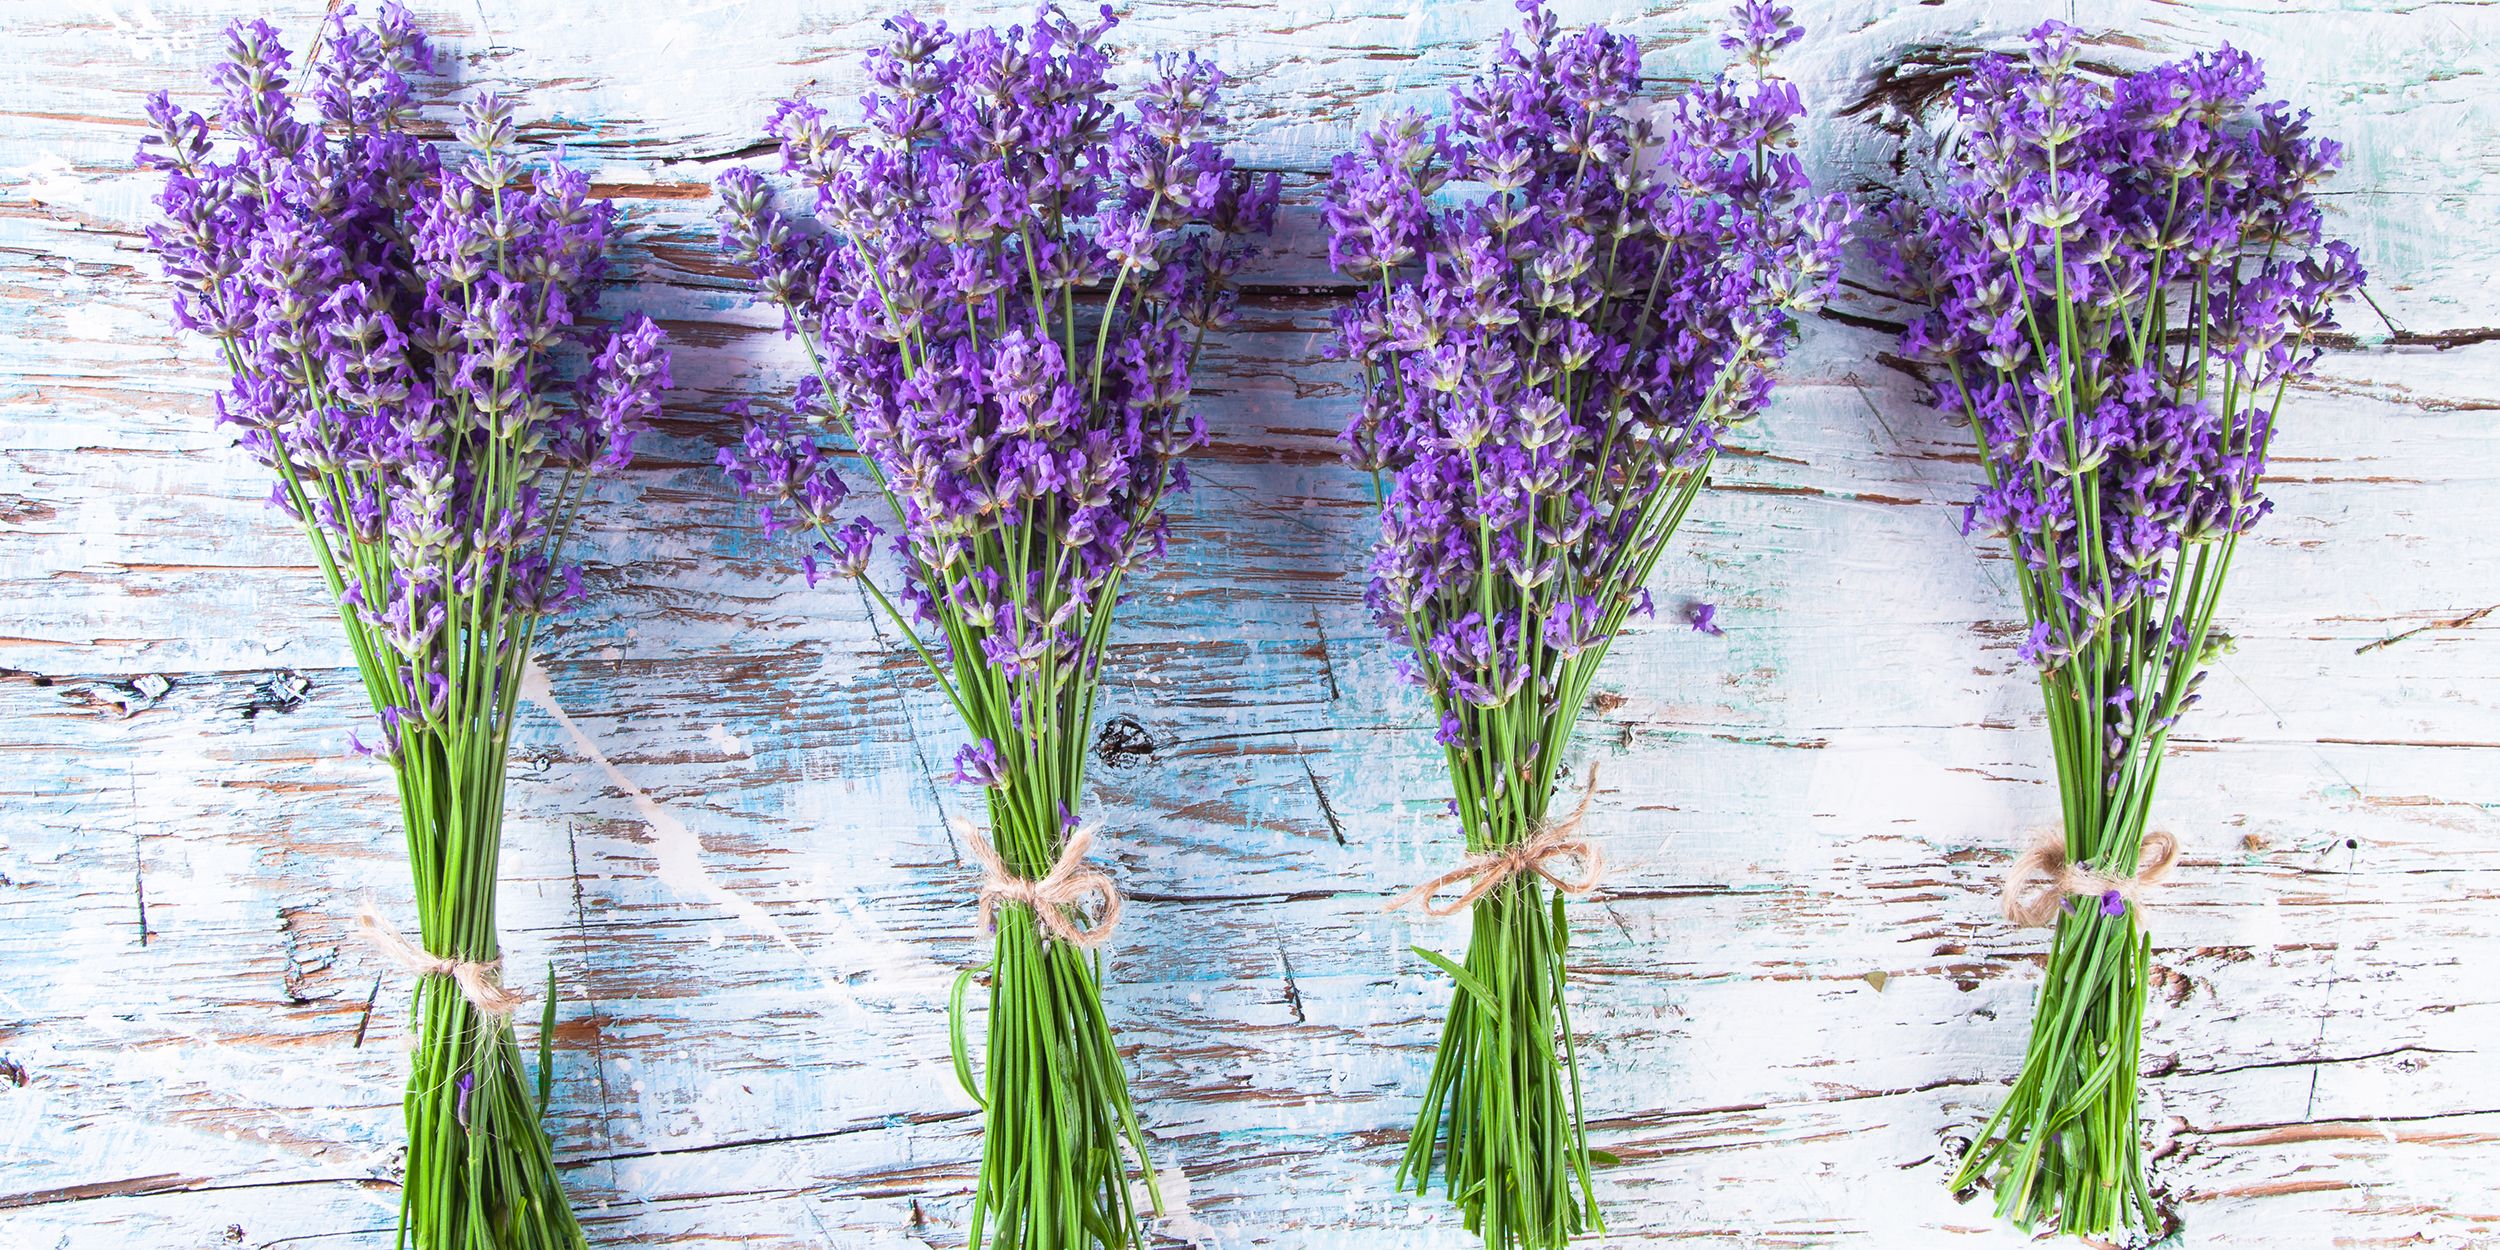 30 Great Lavender Plant Recipes and Uses - How to Grow Lavender